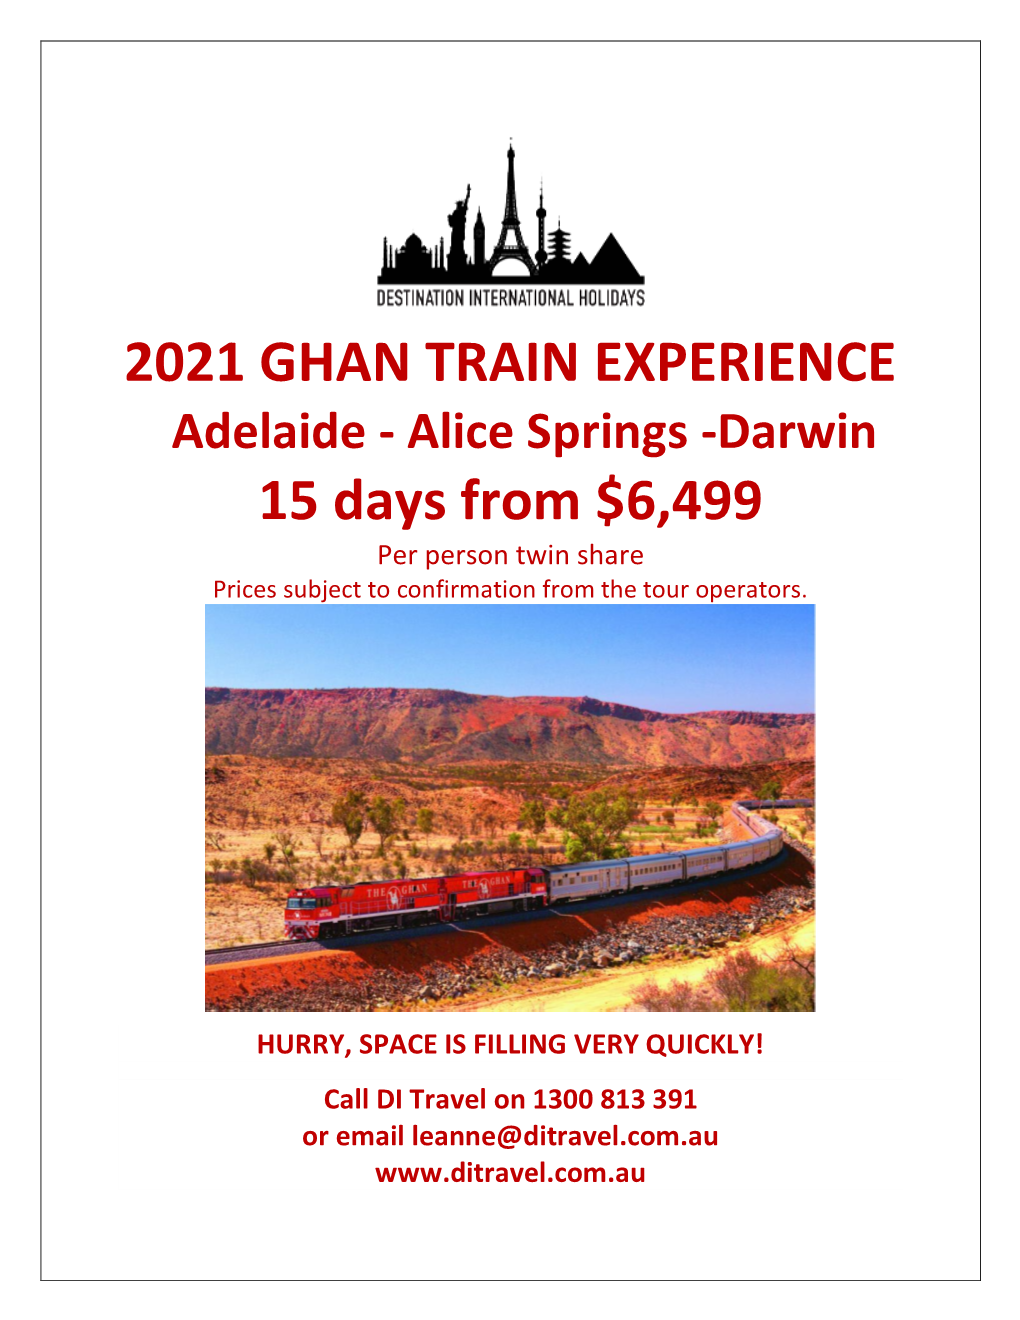 2021 GHAN TRAIN EXPERIENCE 15 Days from $6,499